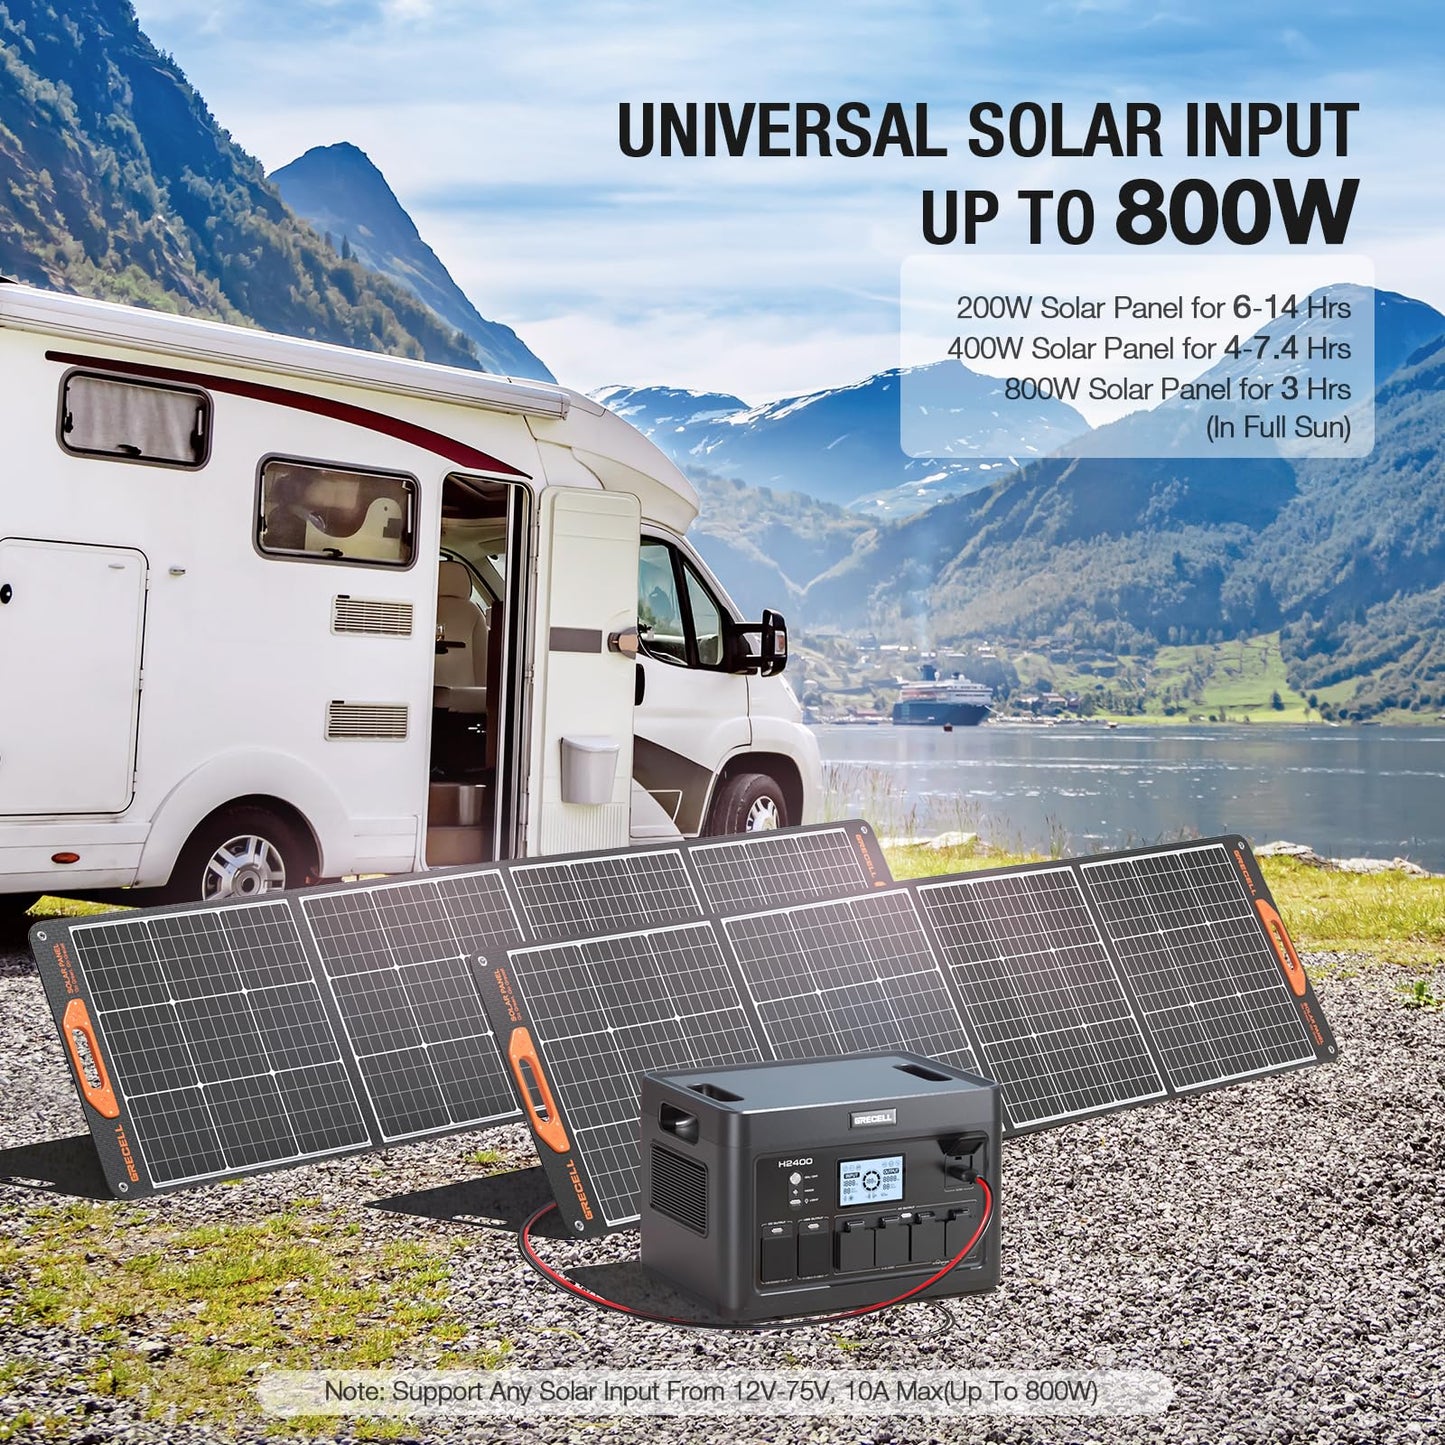 2400W Solar Generator with 2*200W Flexible Solar Panel, GRECELL 1843Wh Portable Power Station w/ 2400W(4800W Peak)4 AC Outlets, Fast Charging Emergency Power Backup Battery UPS for Home Outage RV/Van